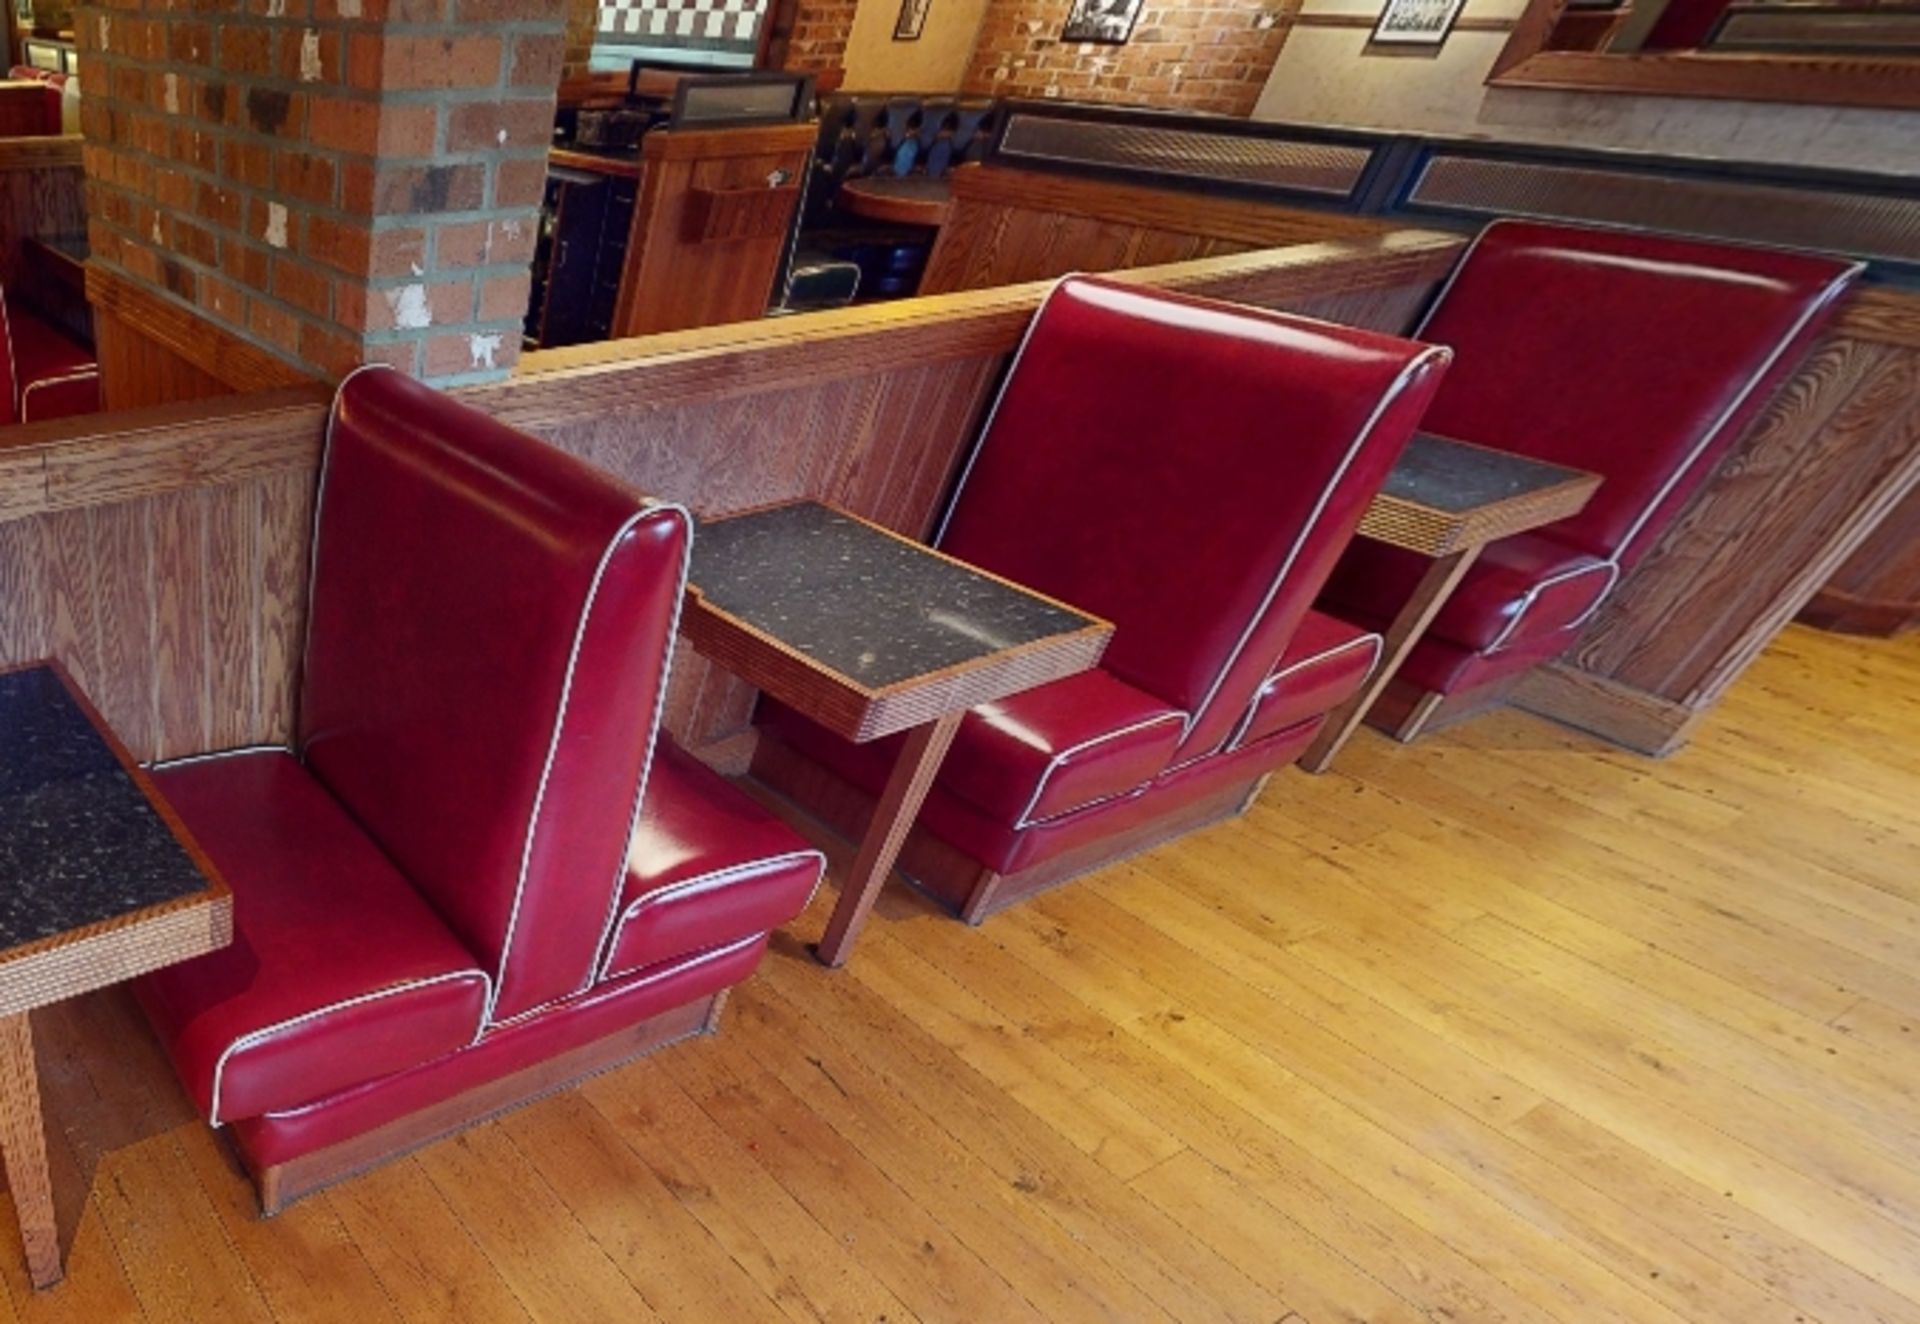 Selection of Single Seating Benches and Dining Tables to Seat Upto 8 Persons - Retro - 1950's - Image 7 of 9